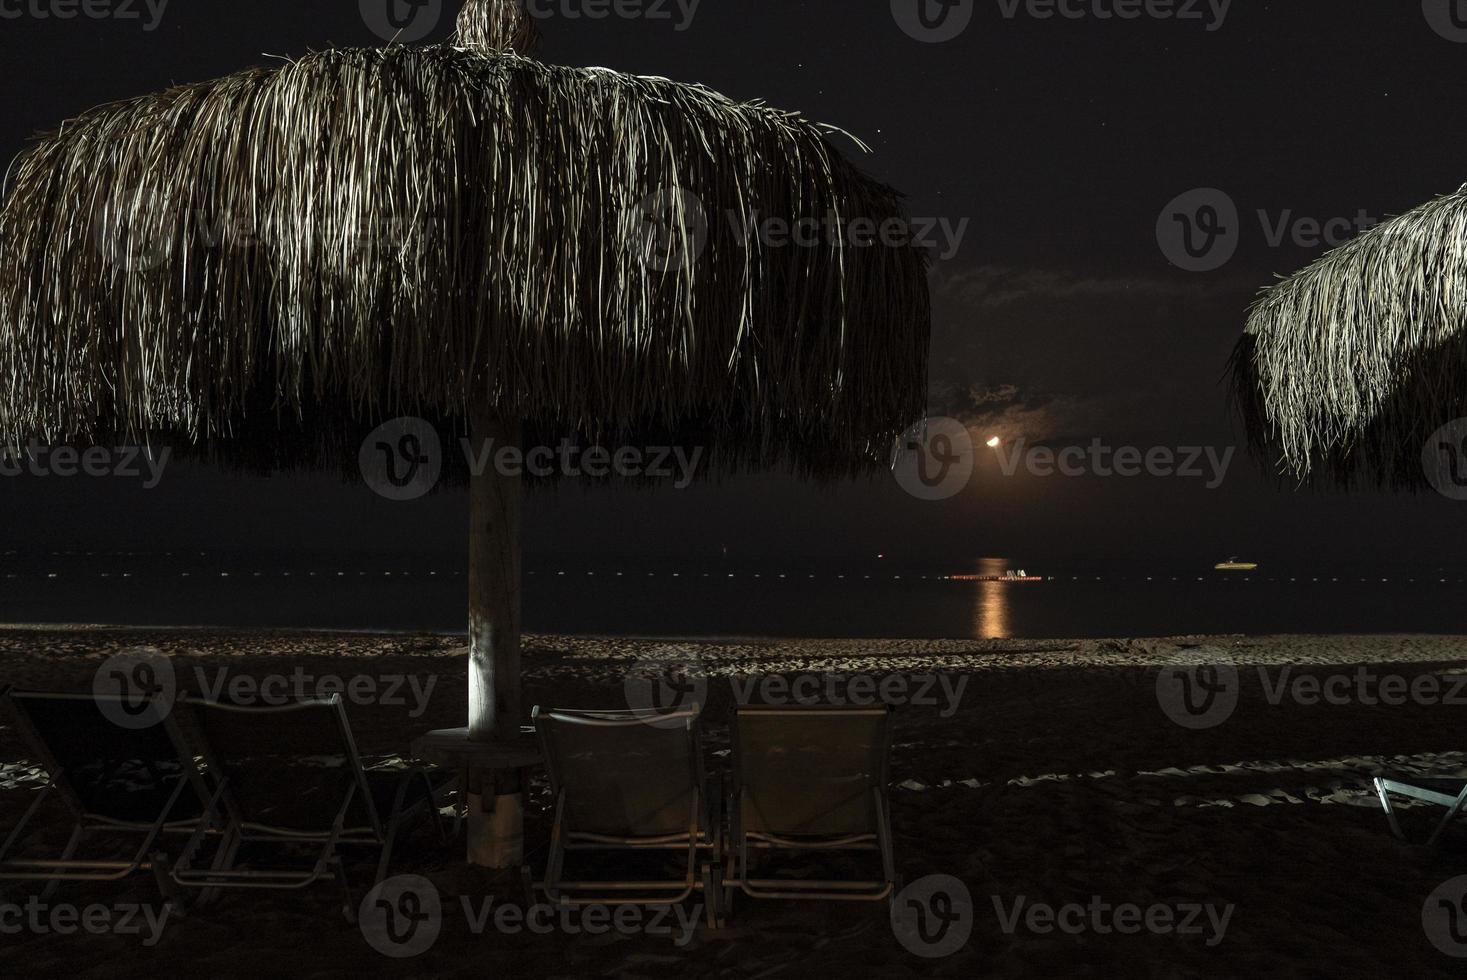 Empty deck chairs and thatched parasol arranged on sandy beach at night photo